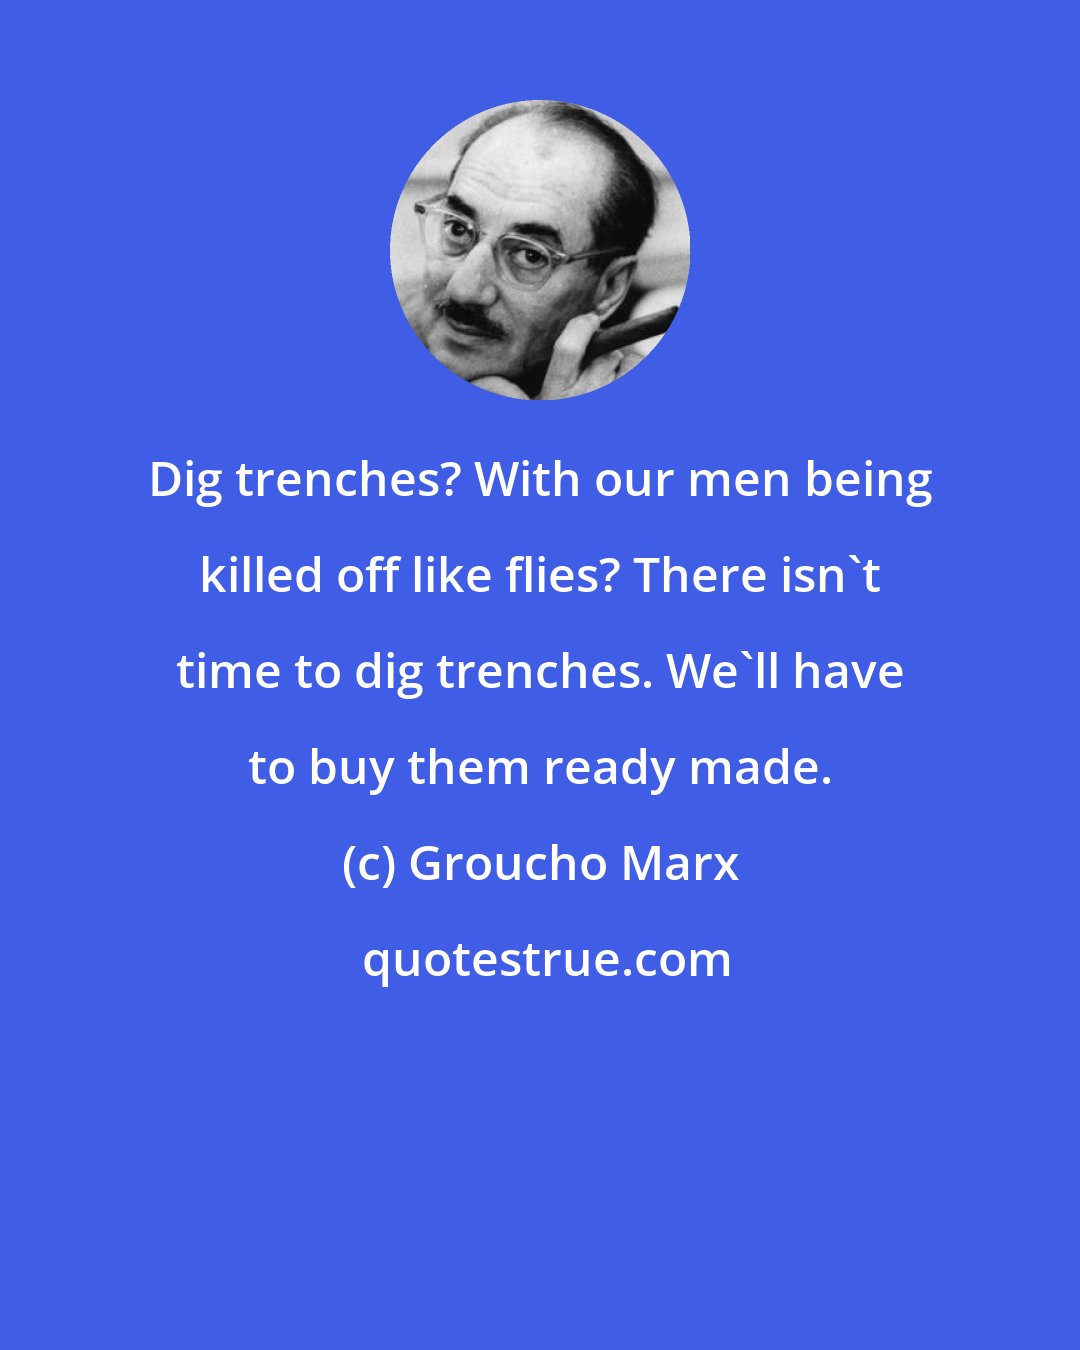 Groucho Marx: Dig trenches? With our men being killed off like flies? There isn't time to dig trenches. We'll have to buy them ready made.